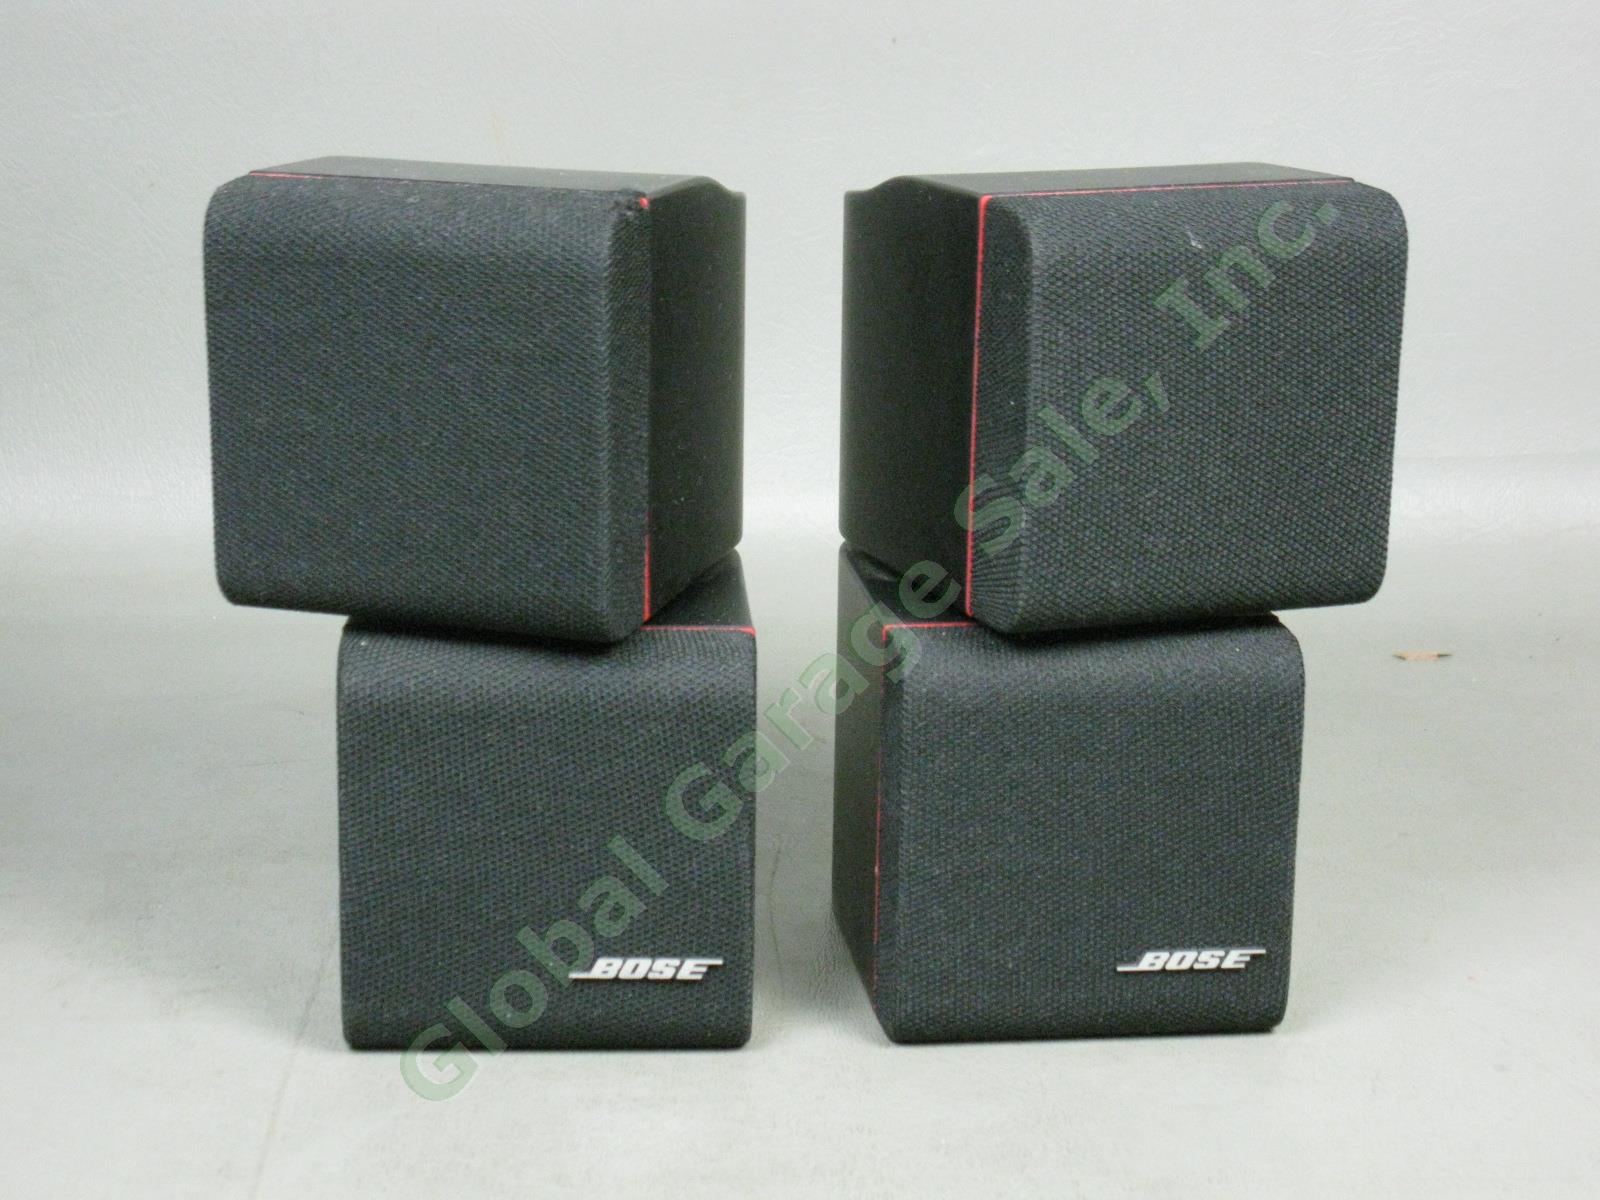 Bose Acoustimass 5 Series II Stereo Speaker System Black One Owner Exc Cond NR! 6